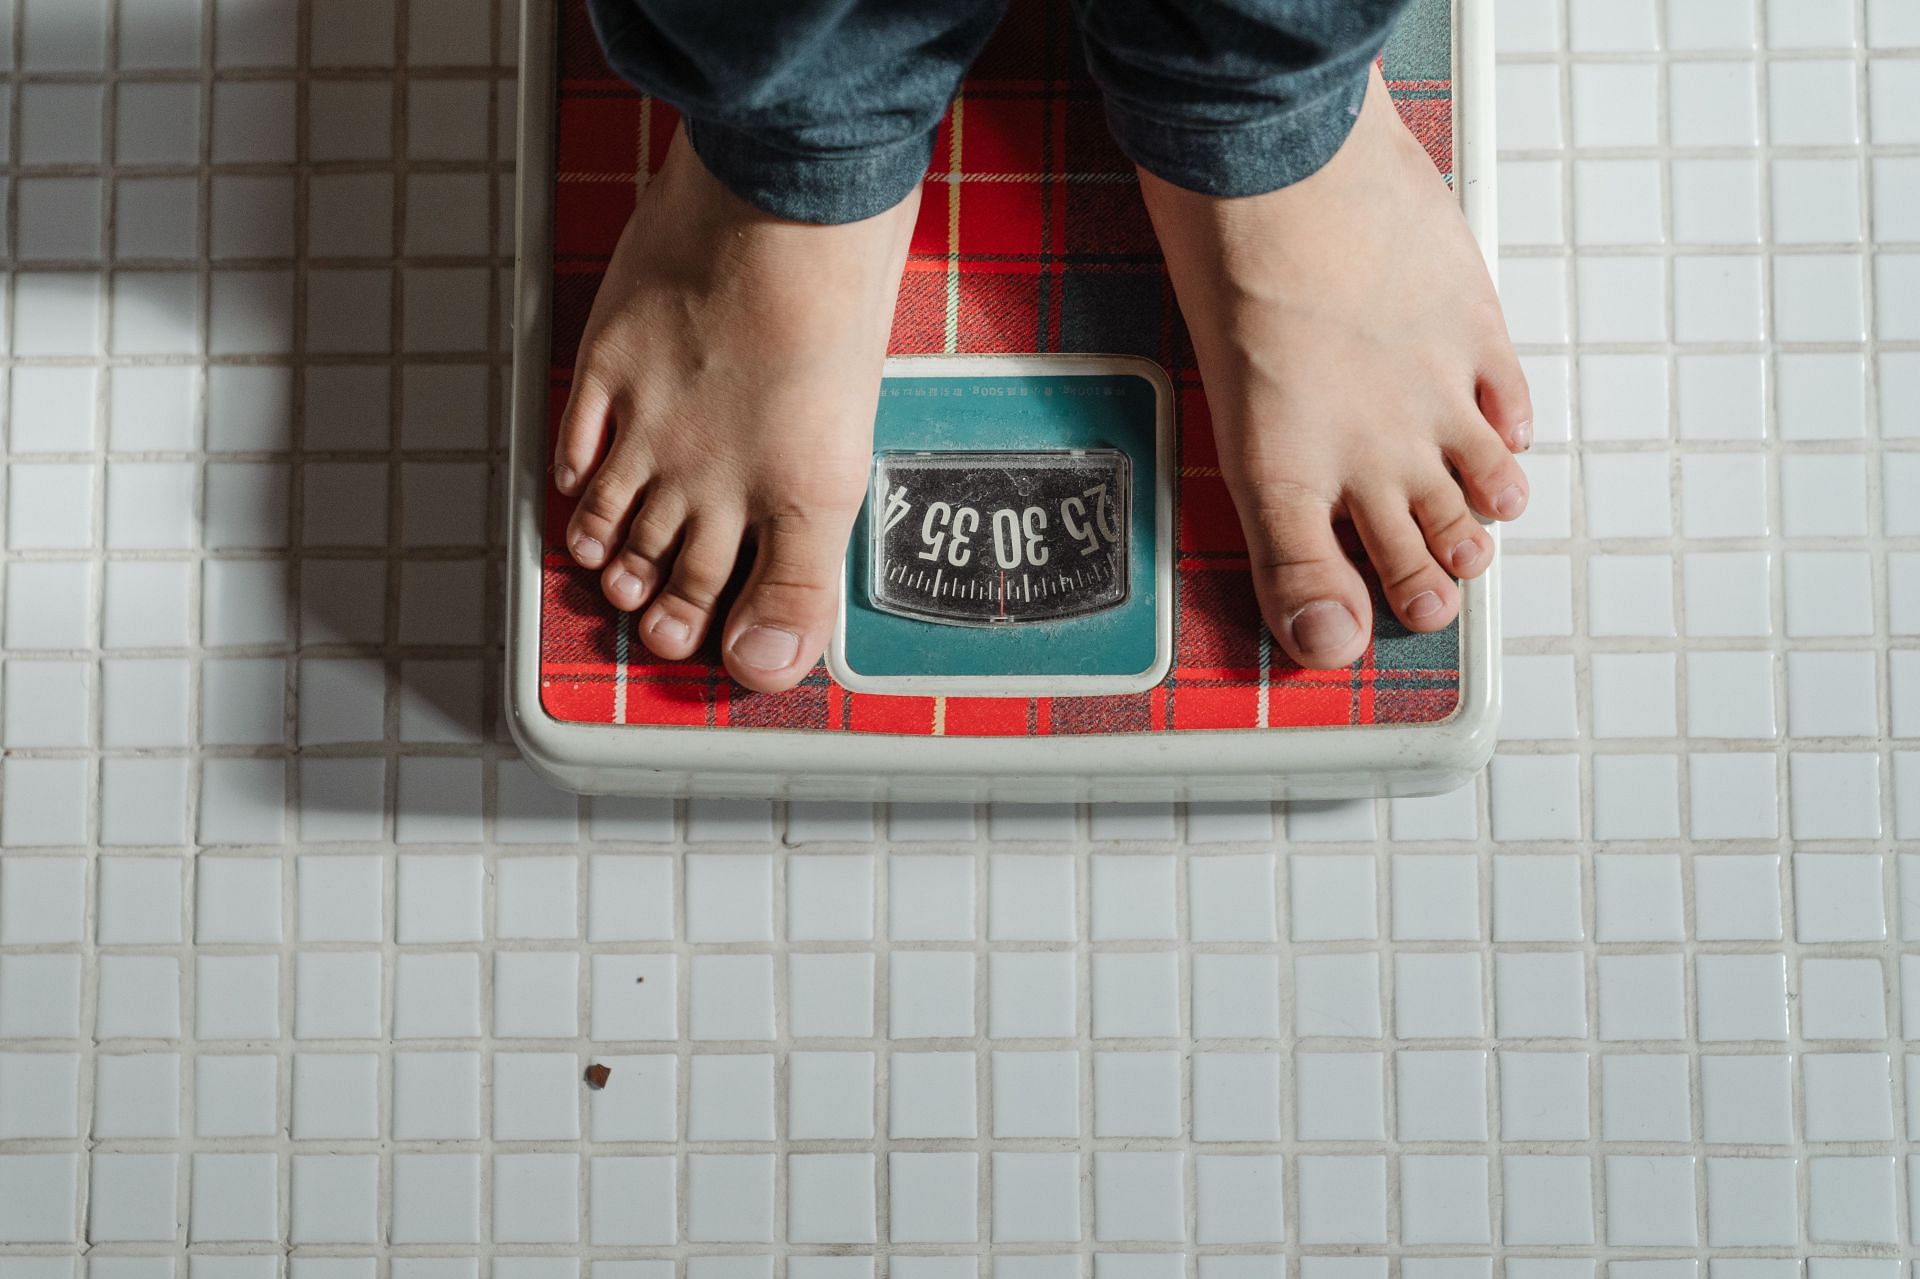 Losing weight with monotropic diet (Image sourced via Pexels/Ketut)